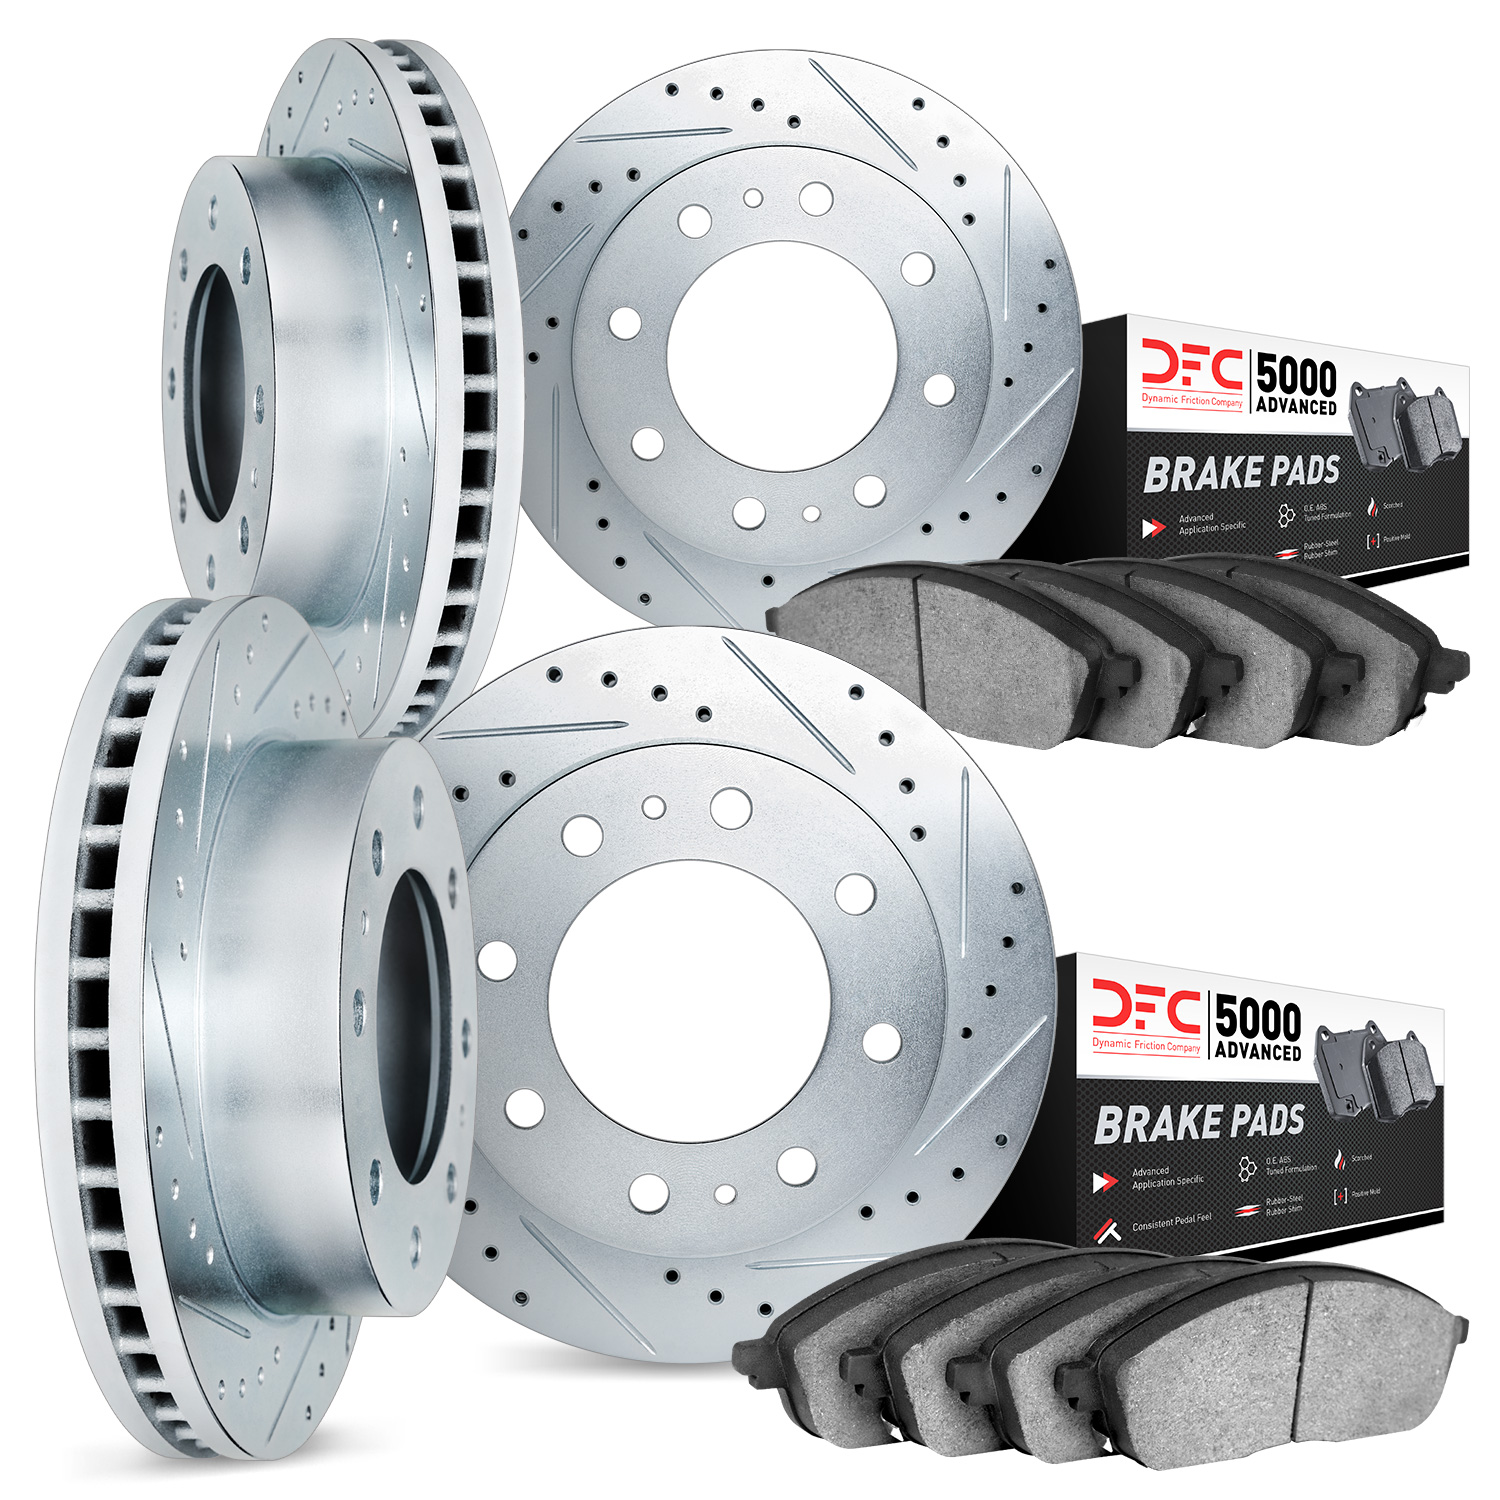 7504-48050 Drilled/Slotted Brake Rotors w/5000 Advanced Brake Pads Kit [Silver], Fits Select GM, Position: Front and Rear